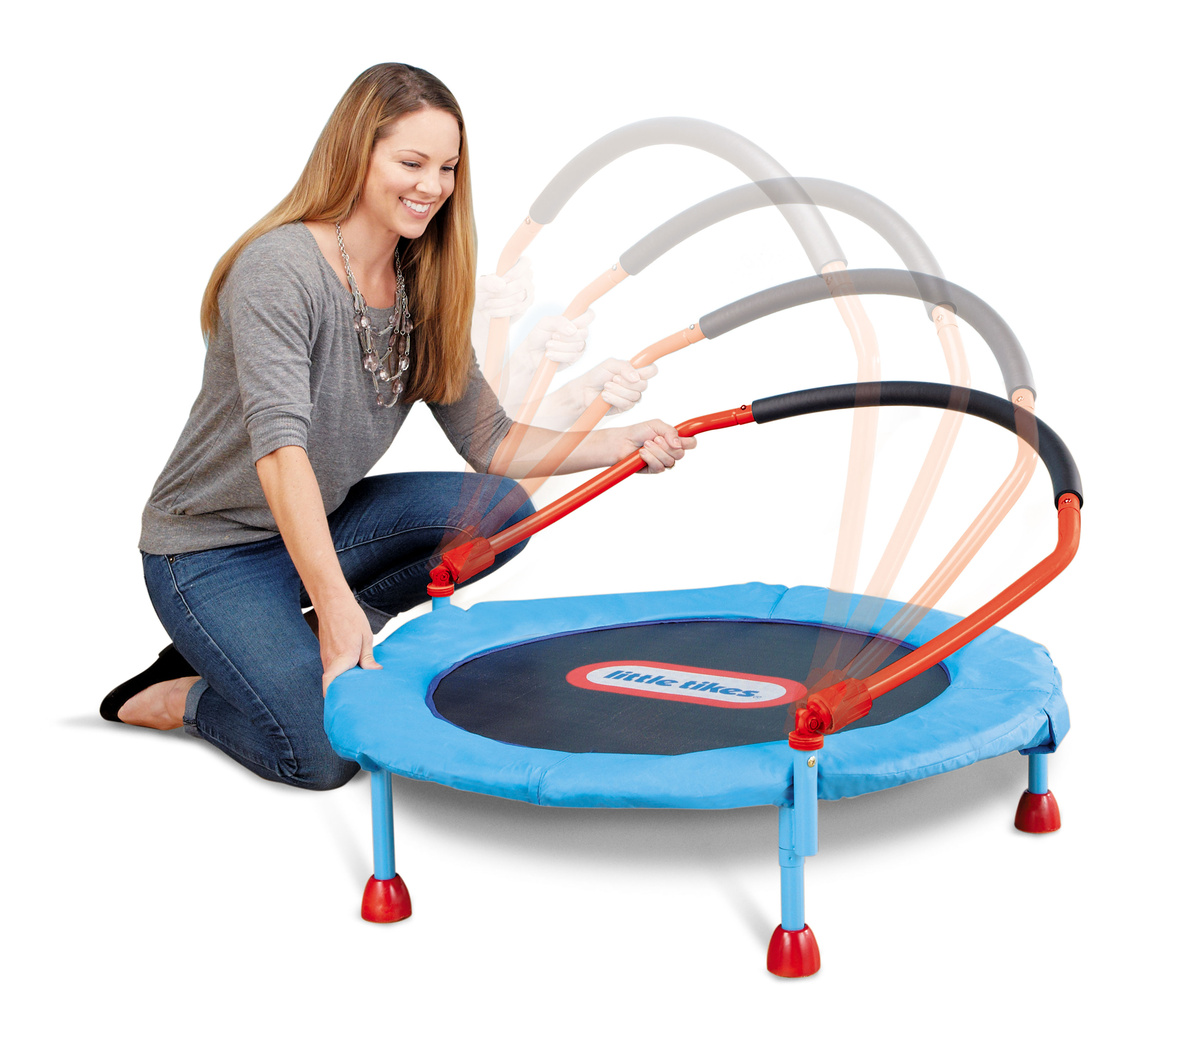 How To Disassemble Little Tikes Trampoline 1704162928 